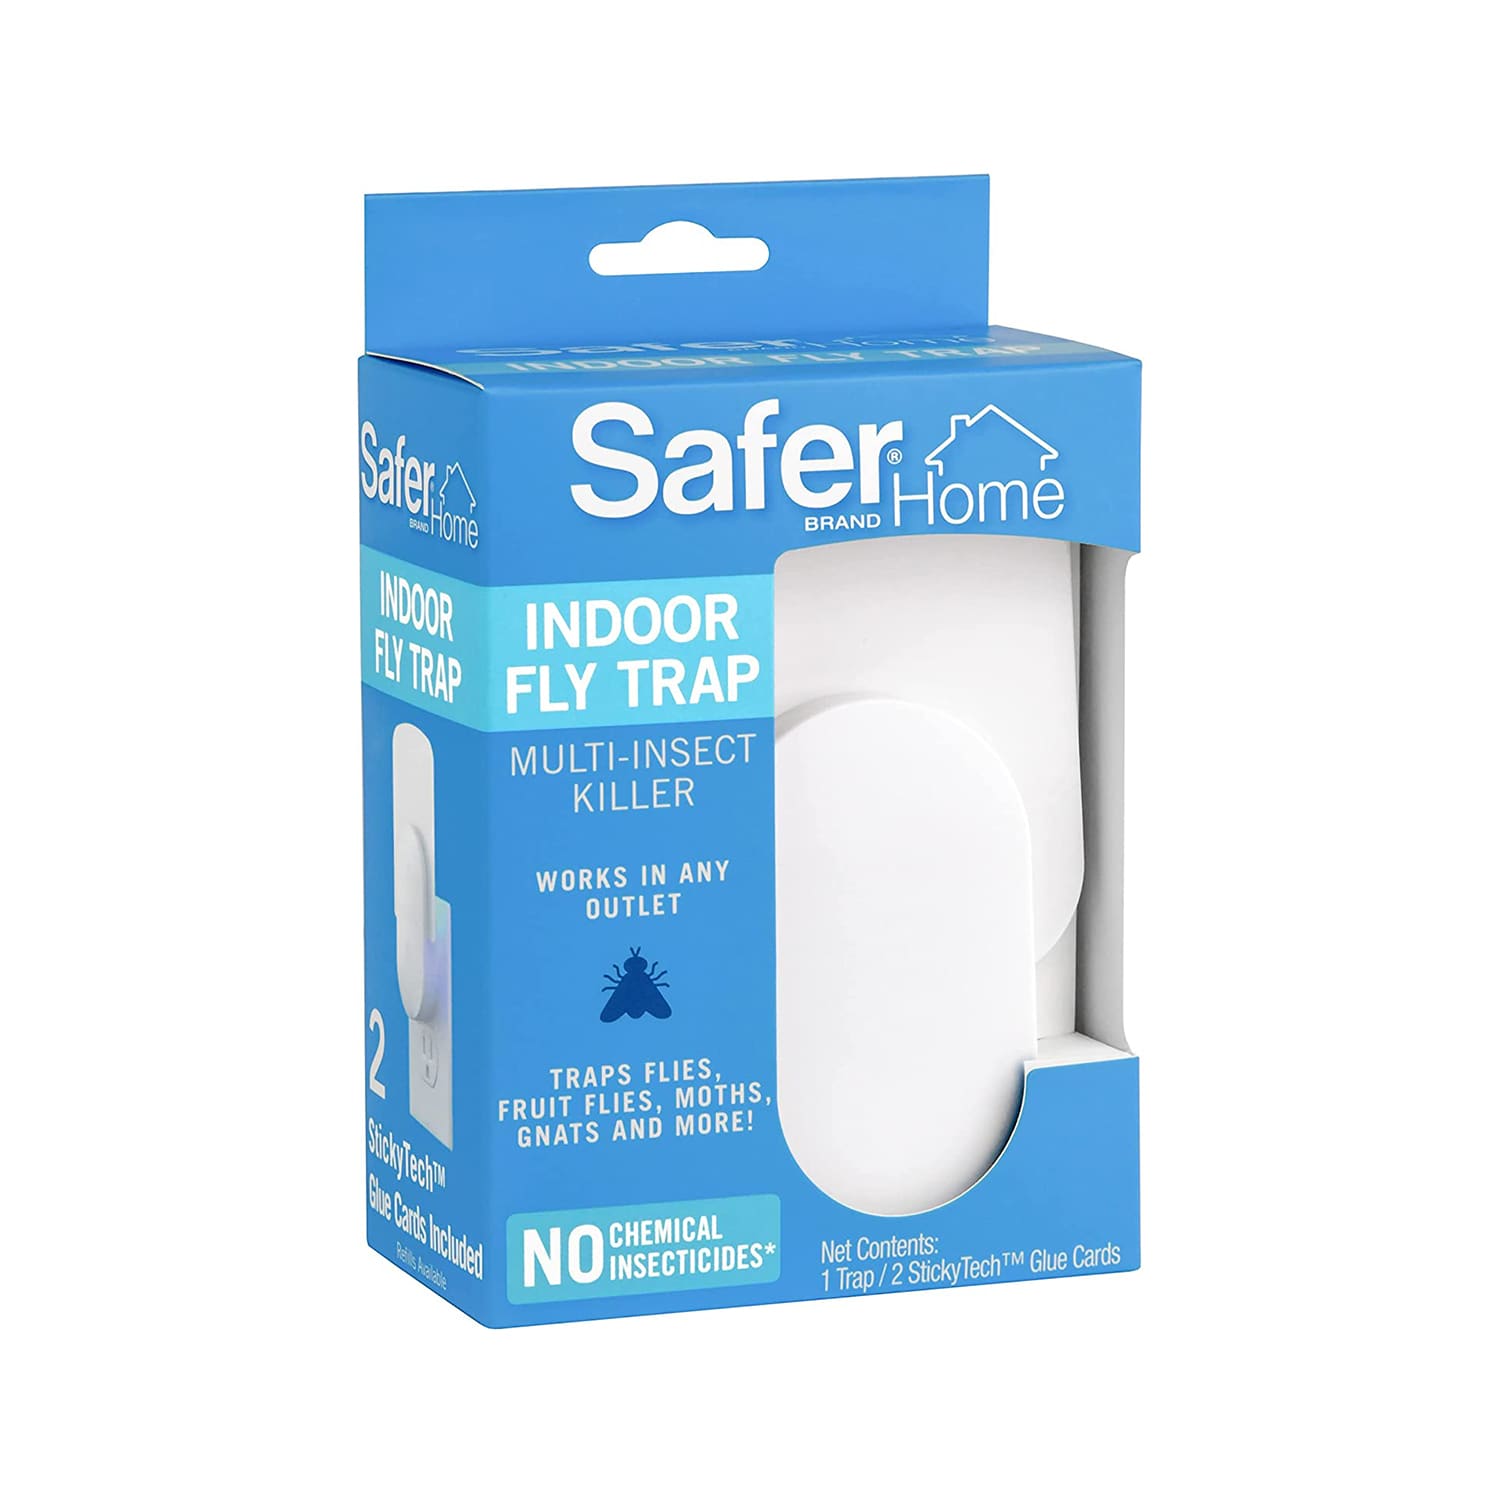 http://cdn.apartmenttherapy.info/image/upload/v1686599691/k/Edit/2023-06-amazon-find-keeps-my-kitchen-bug-free/safer-home-indoor-plug-in-fly-trap.jpg